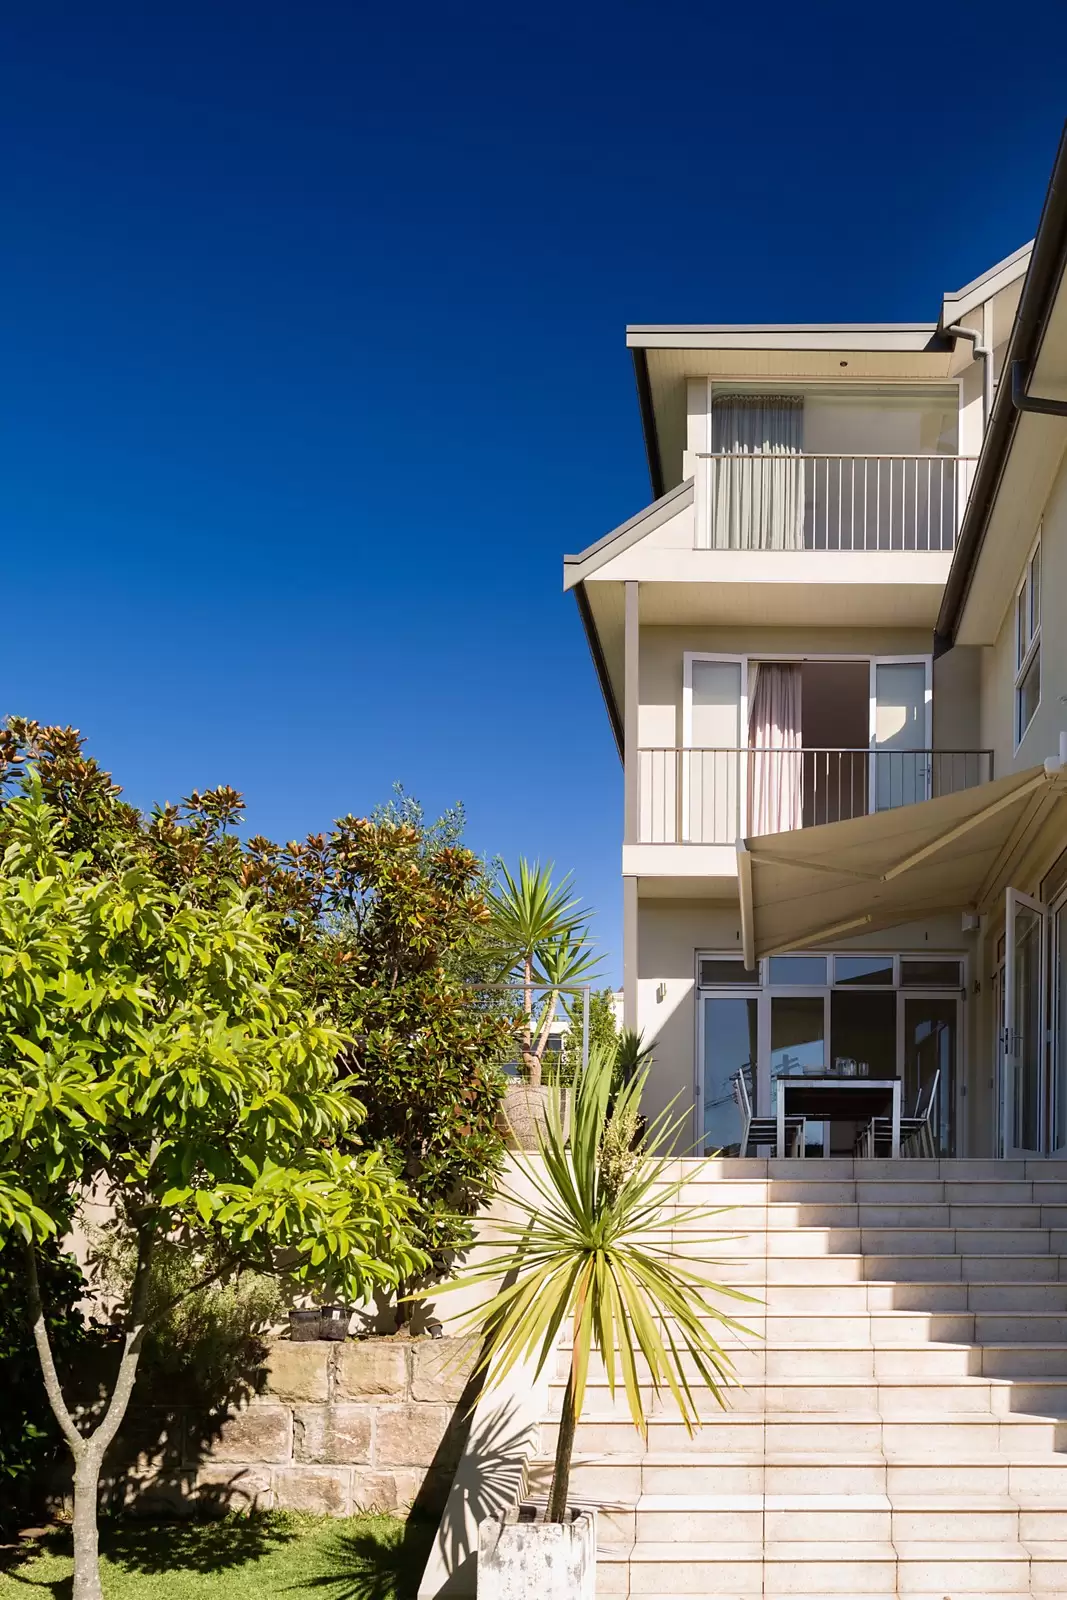 Photo #9: 85 Vaucluse Road, Vaucluse - Sold by Sydney Sotheby's International Realty